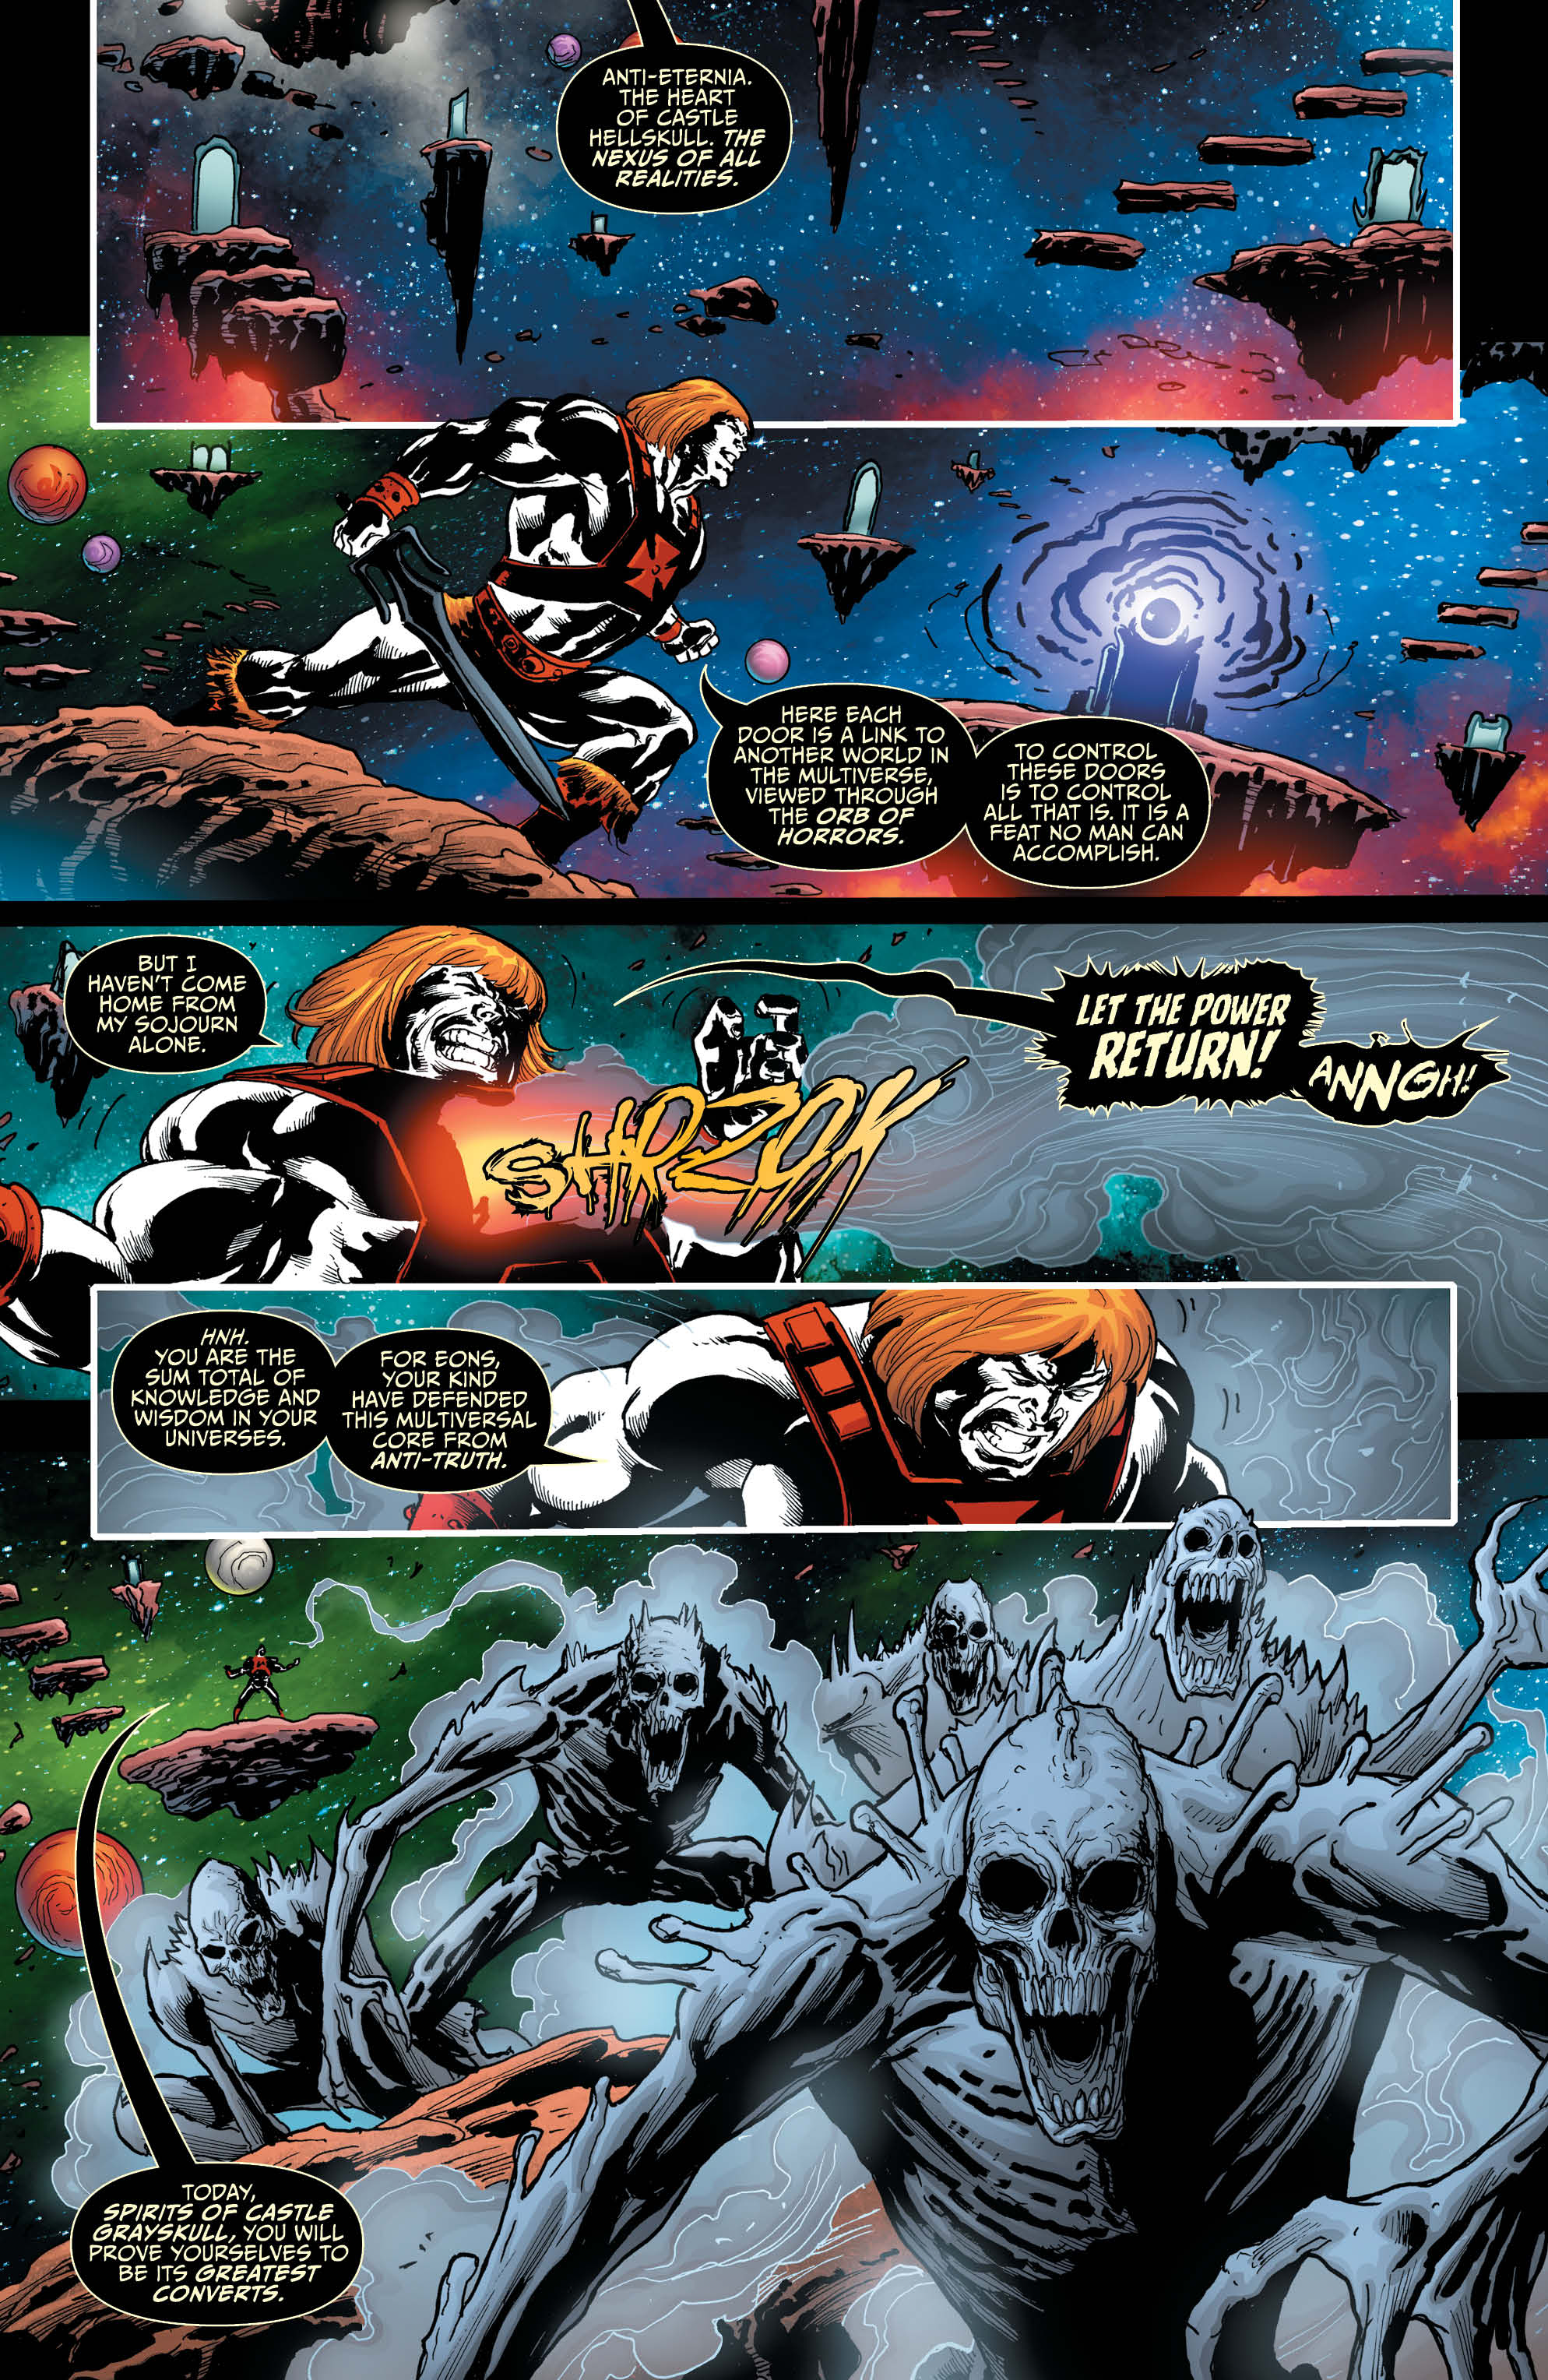 HE-MAN & THE MASTERS OF THE MULTIVERSE #61